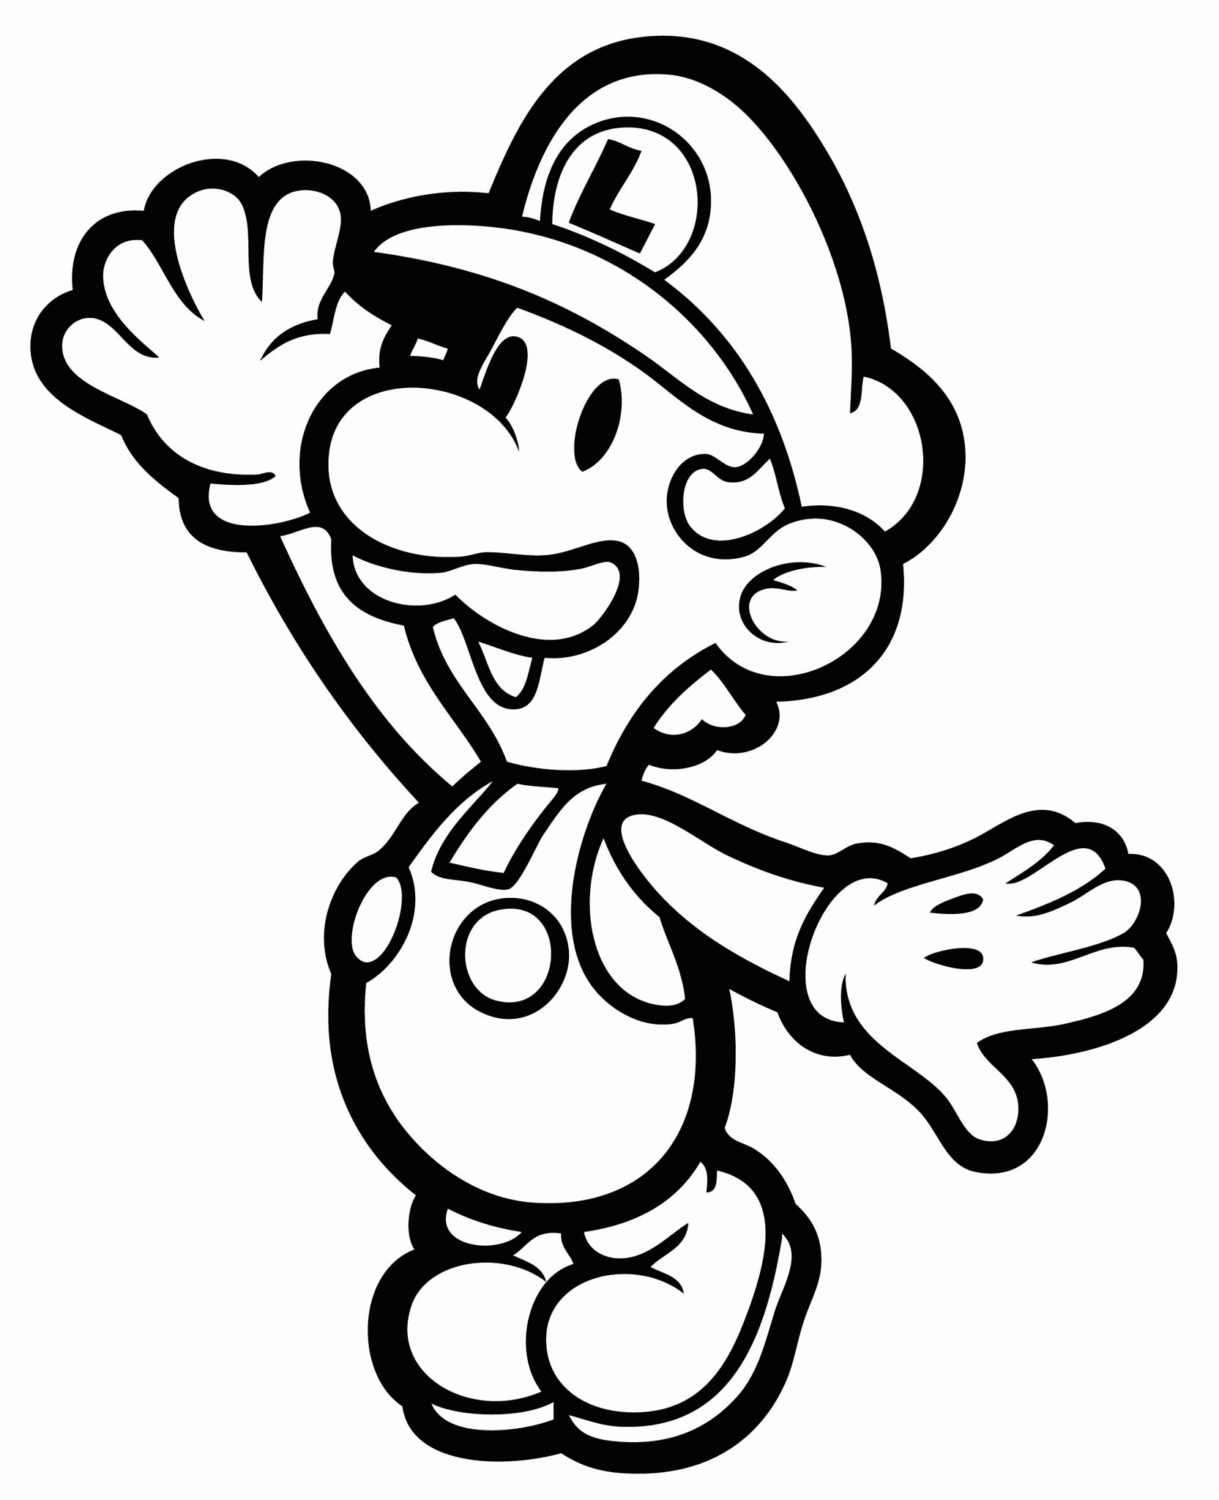 Free All Mario Character Coloring Pages, Download Free All Mario ...